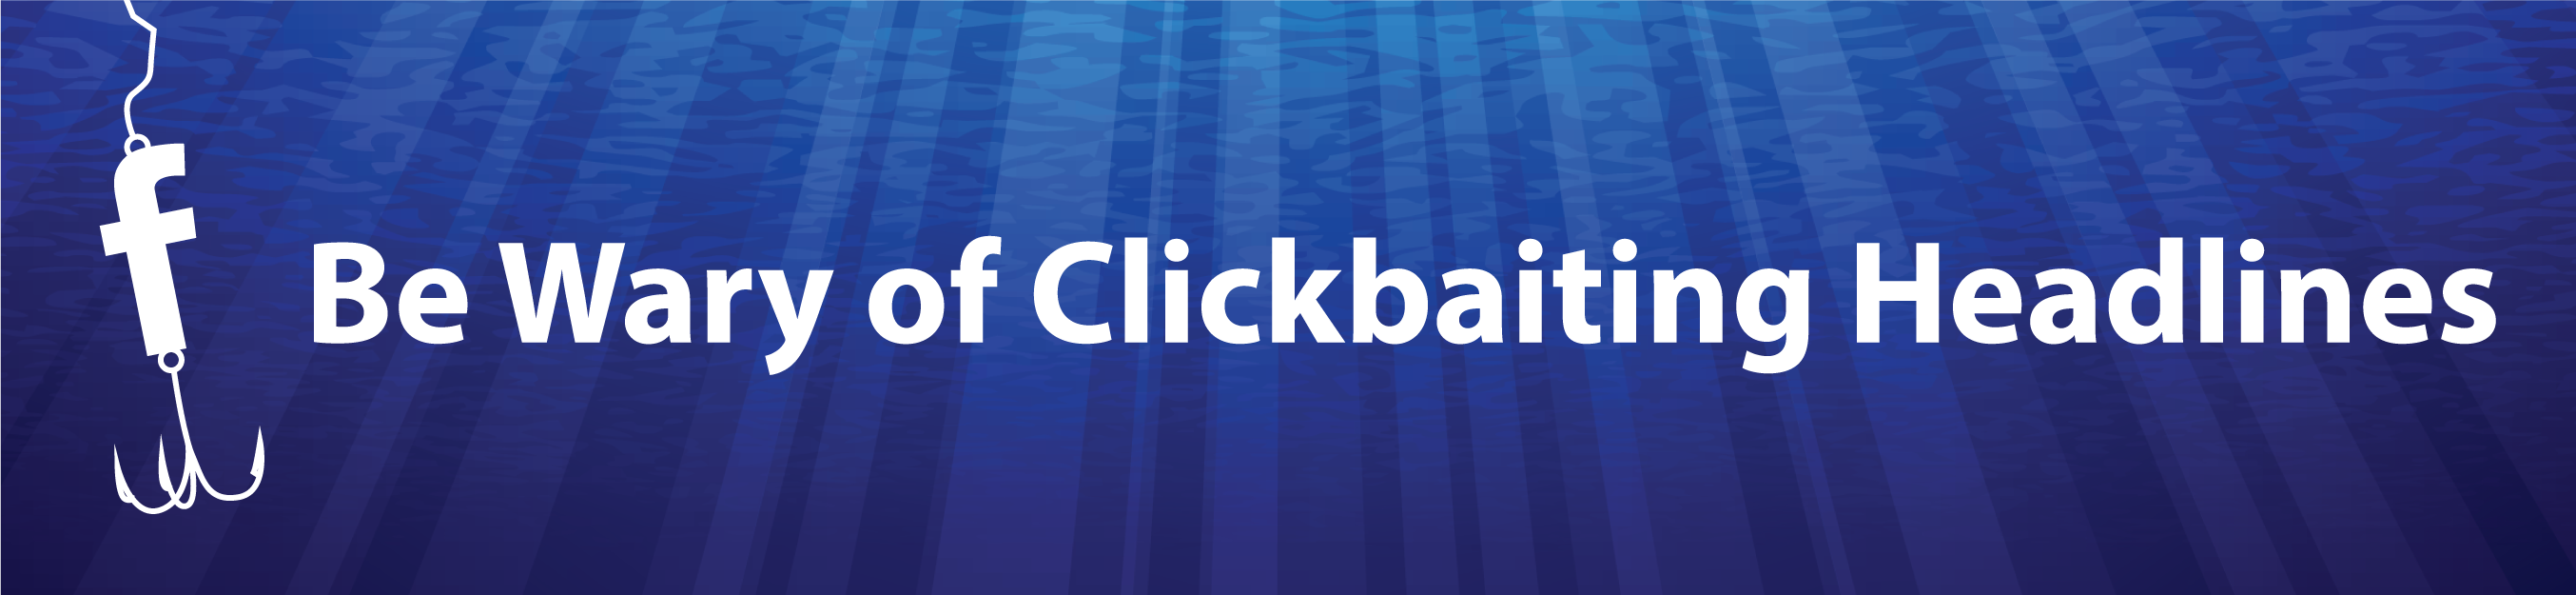 Be wary of clickbaiting headlines Getsocial